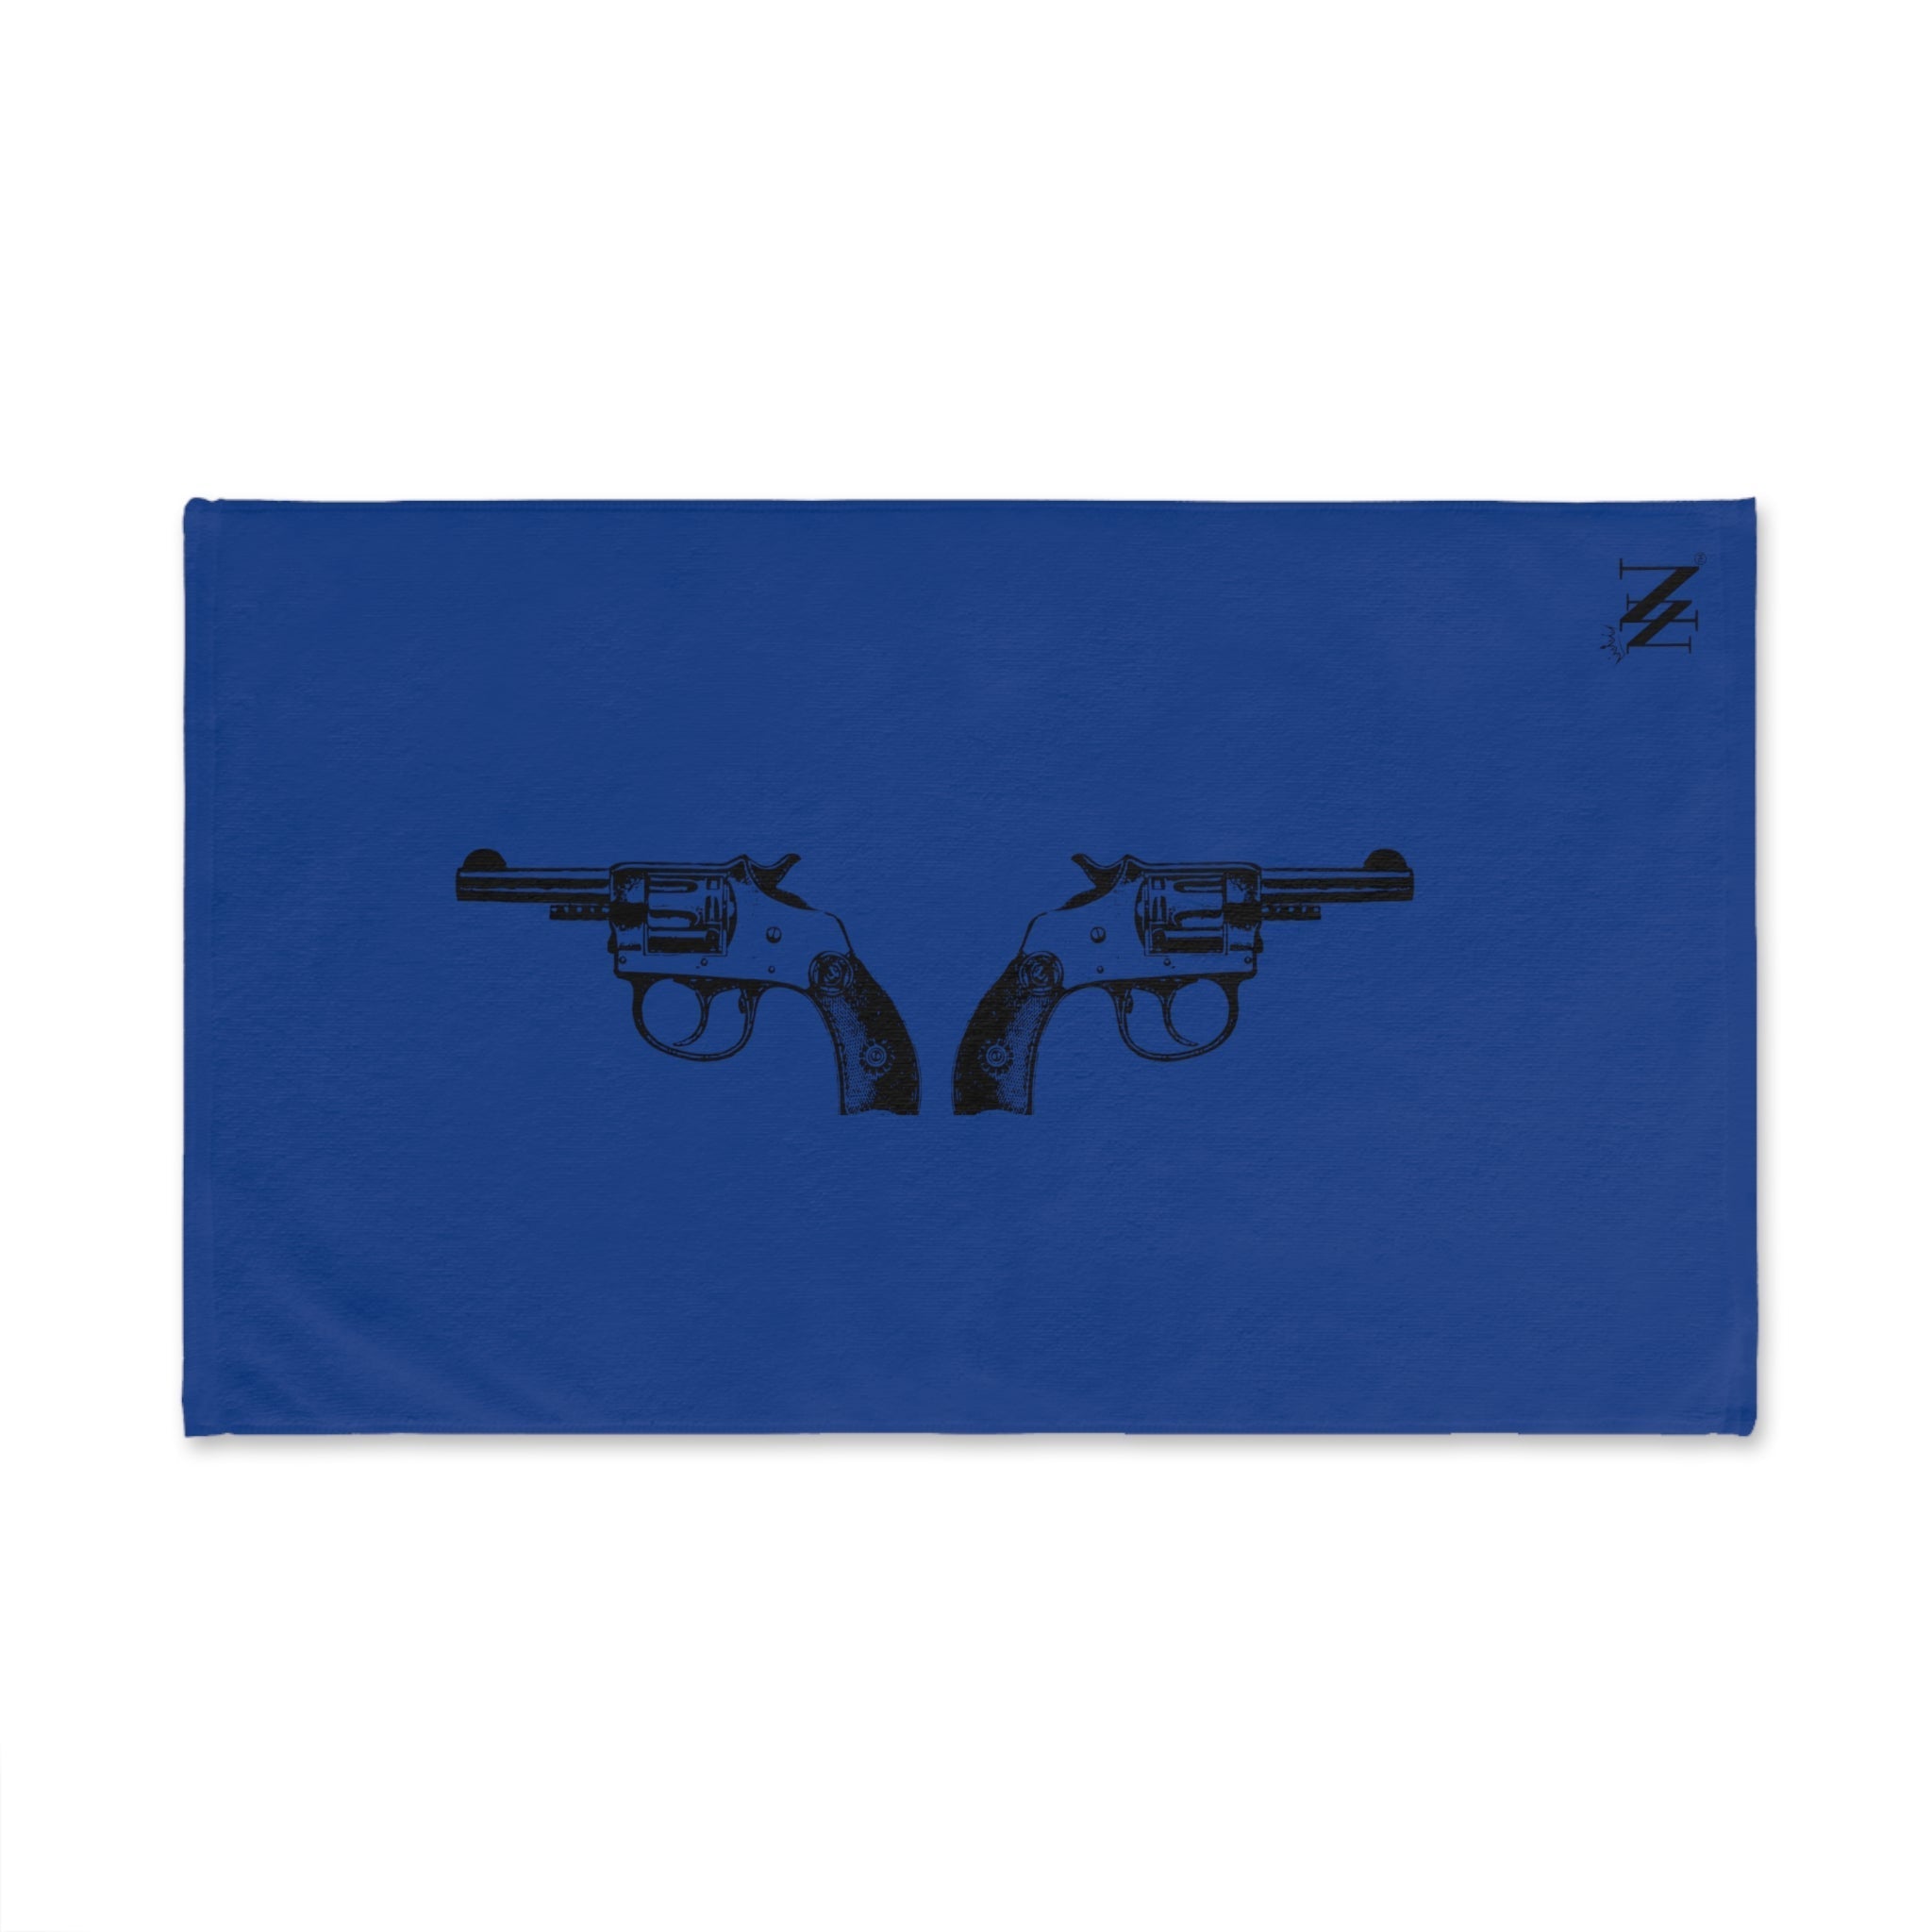 Black Revolver Gun Show Blue | Gifts for Boyfriend, Funny Towel Romantic Gift for Wedding Couple Fiance First Year Anniversary Valentines, Party Gag Gifts, Joke Humor Cloth for Husband Men BF NECTAR NAPKINS